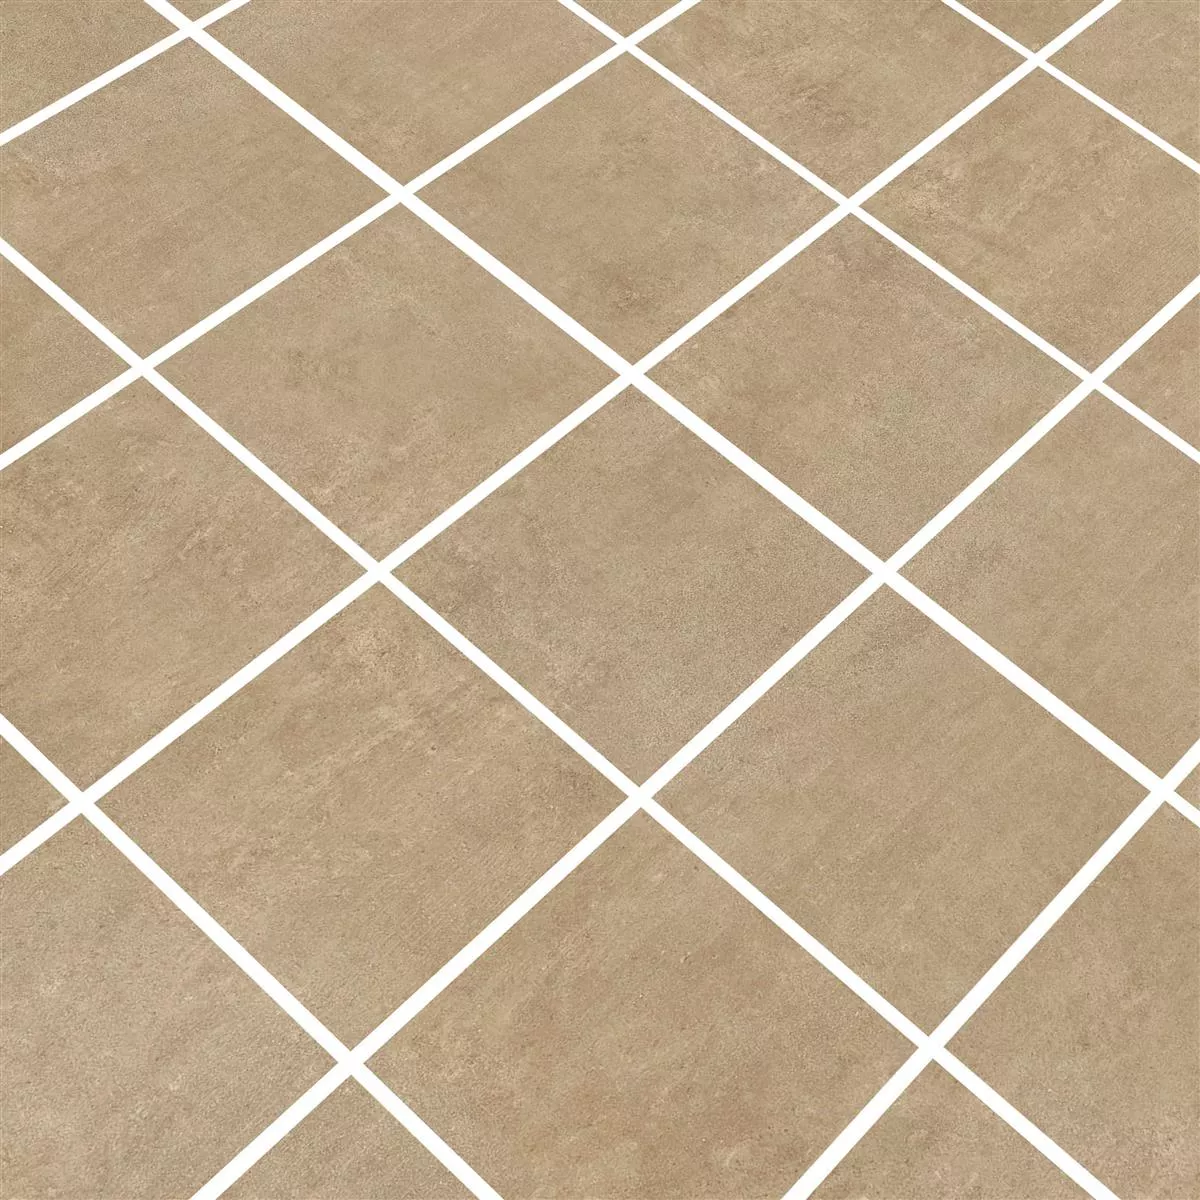 Mosaic Tiles Cairo Taupe Square 6mm